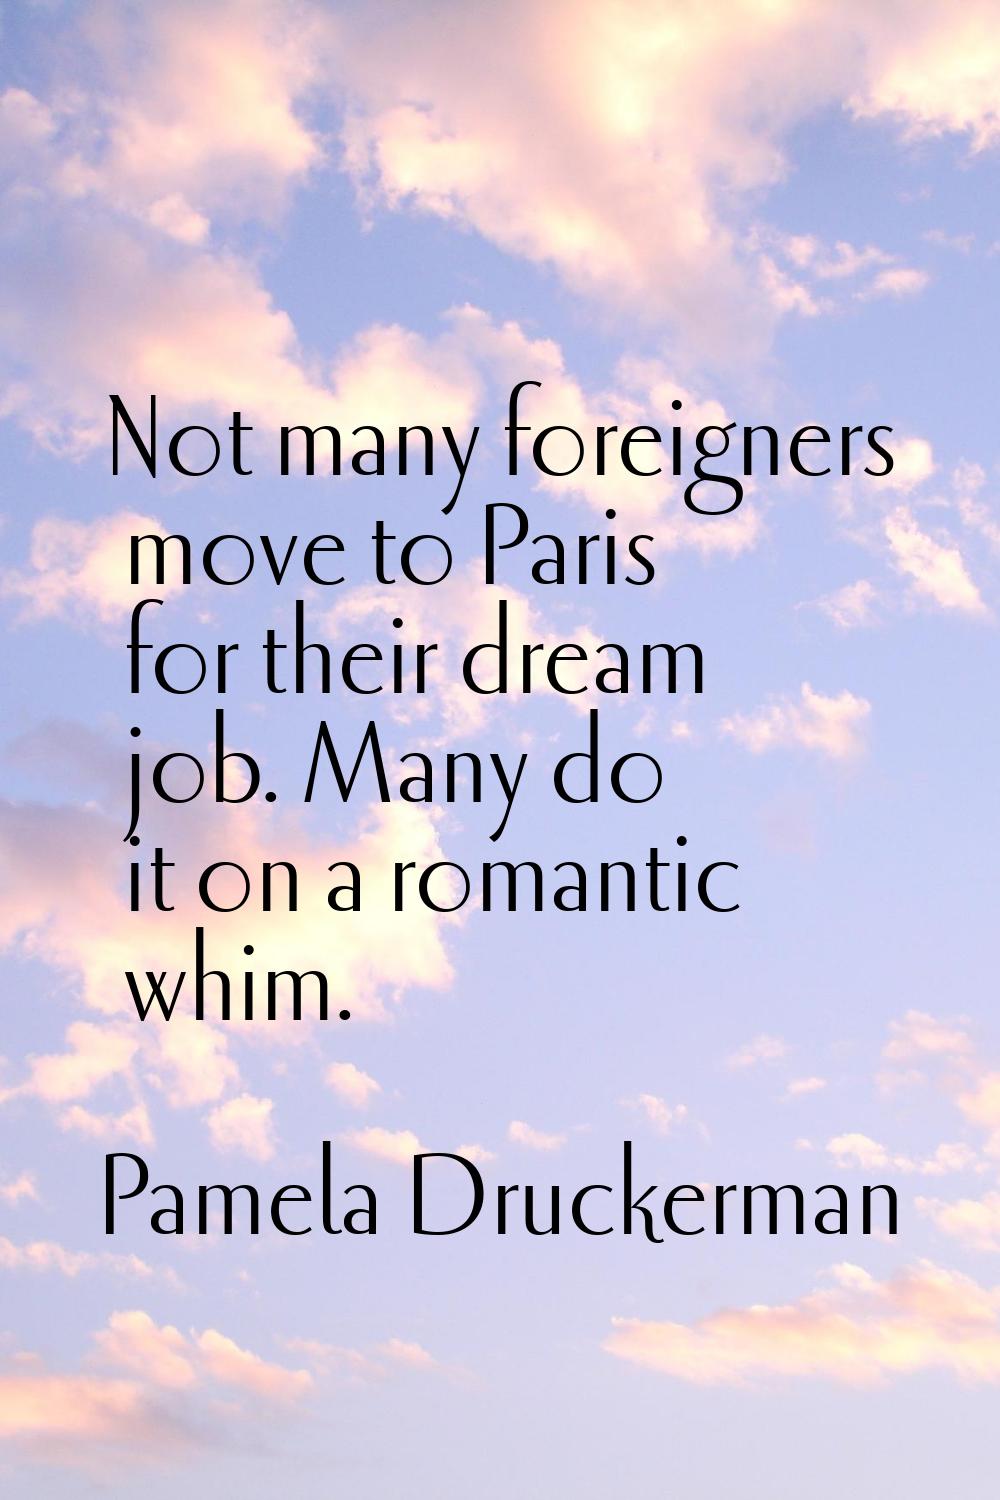 Not many foreigners move to Paris for their dream job. Many do it on a romantic whim.